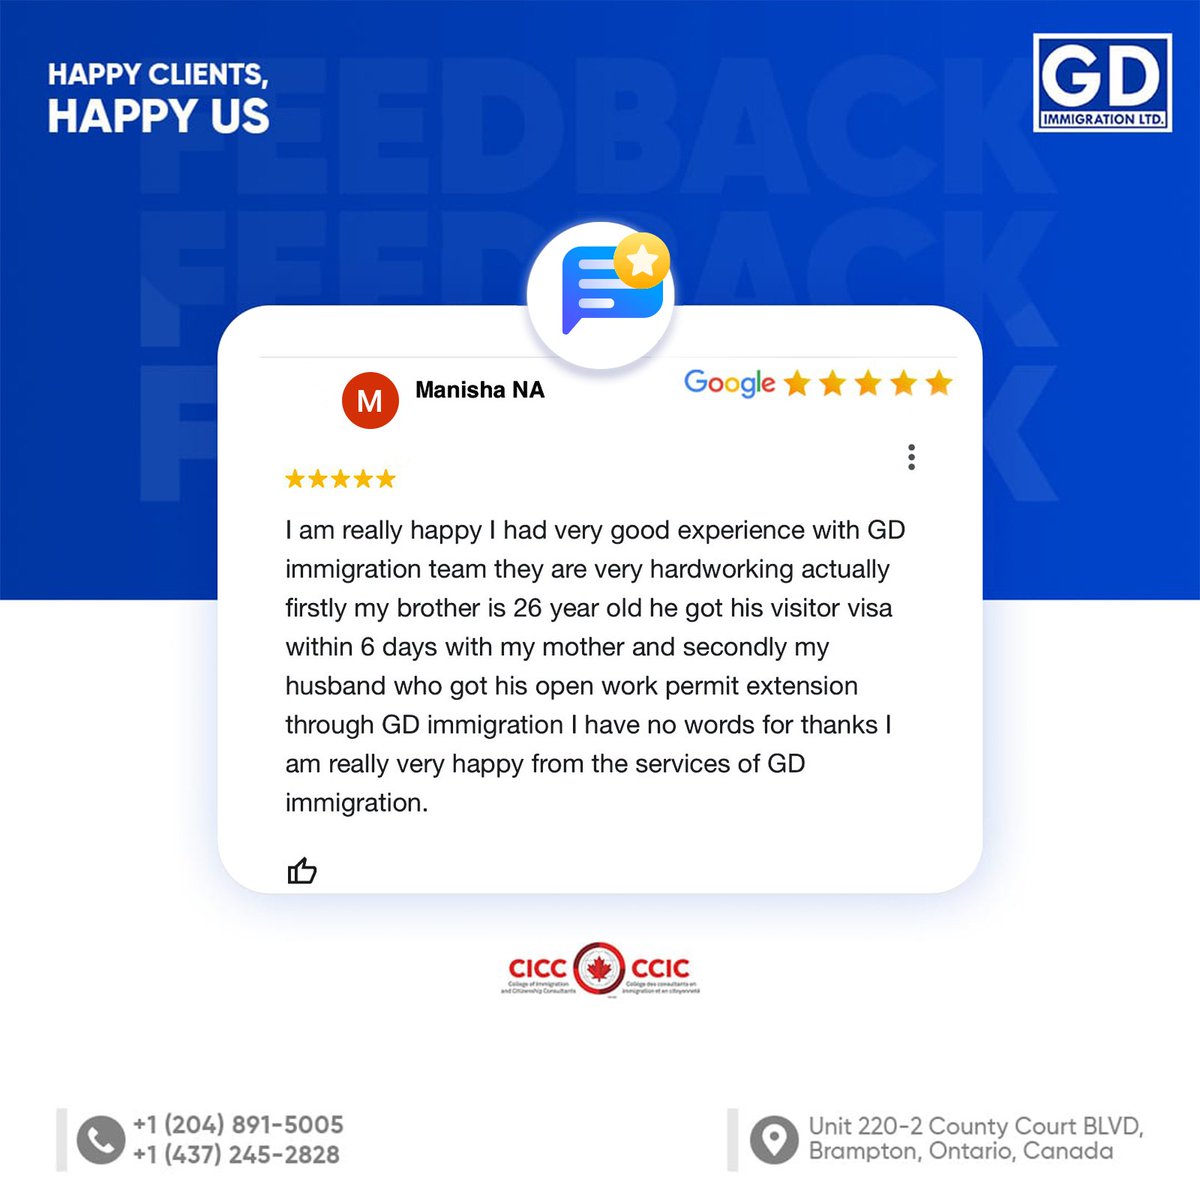 Manisha shares her fantastic experience with GD Immigration. 🎉 Our team helped her family, and her husband successfully received his open work permit extension. Thank you, Manisha.

#GDImmigration #Canada #GoogleReview #CanadaSuperVisa #Visa #exploreCanada #VisaApproval